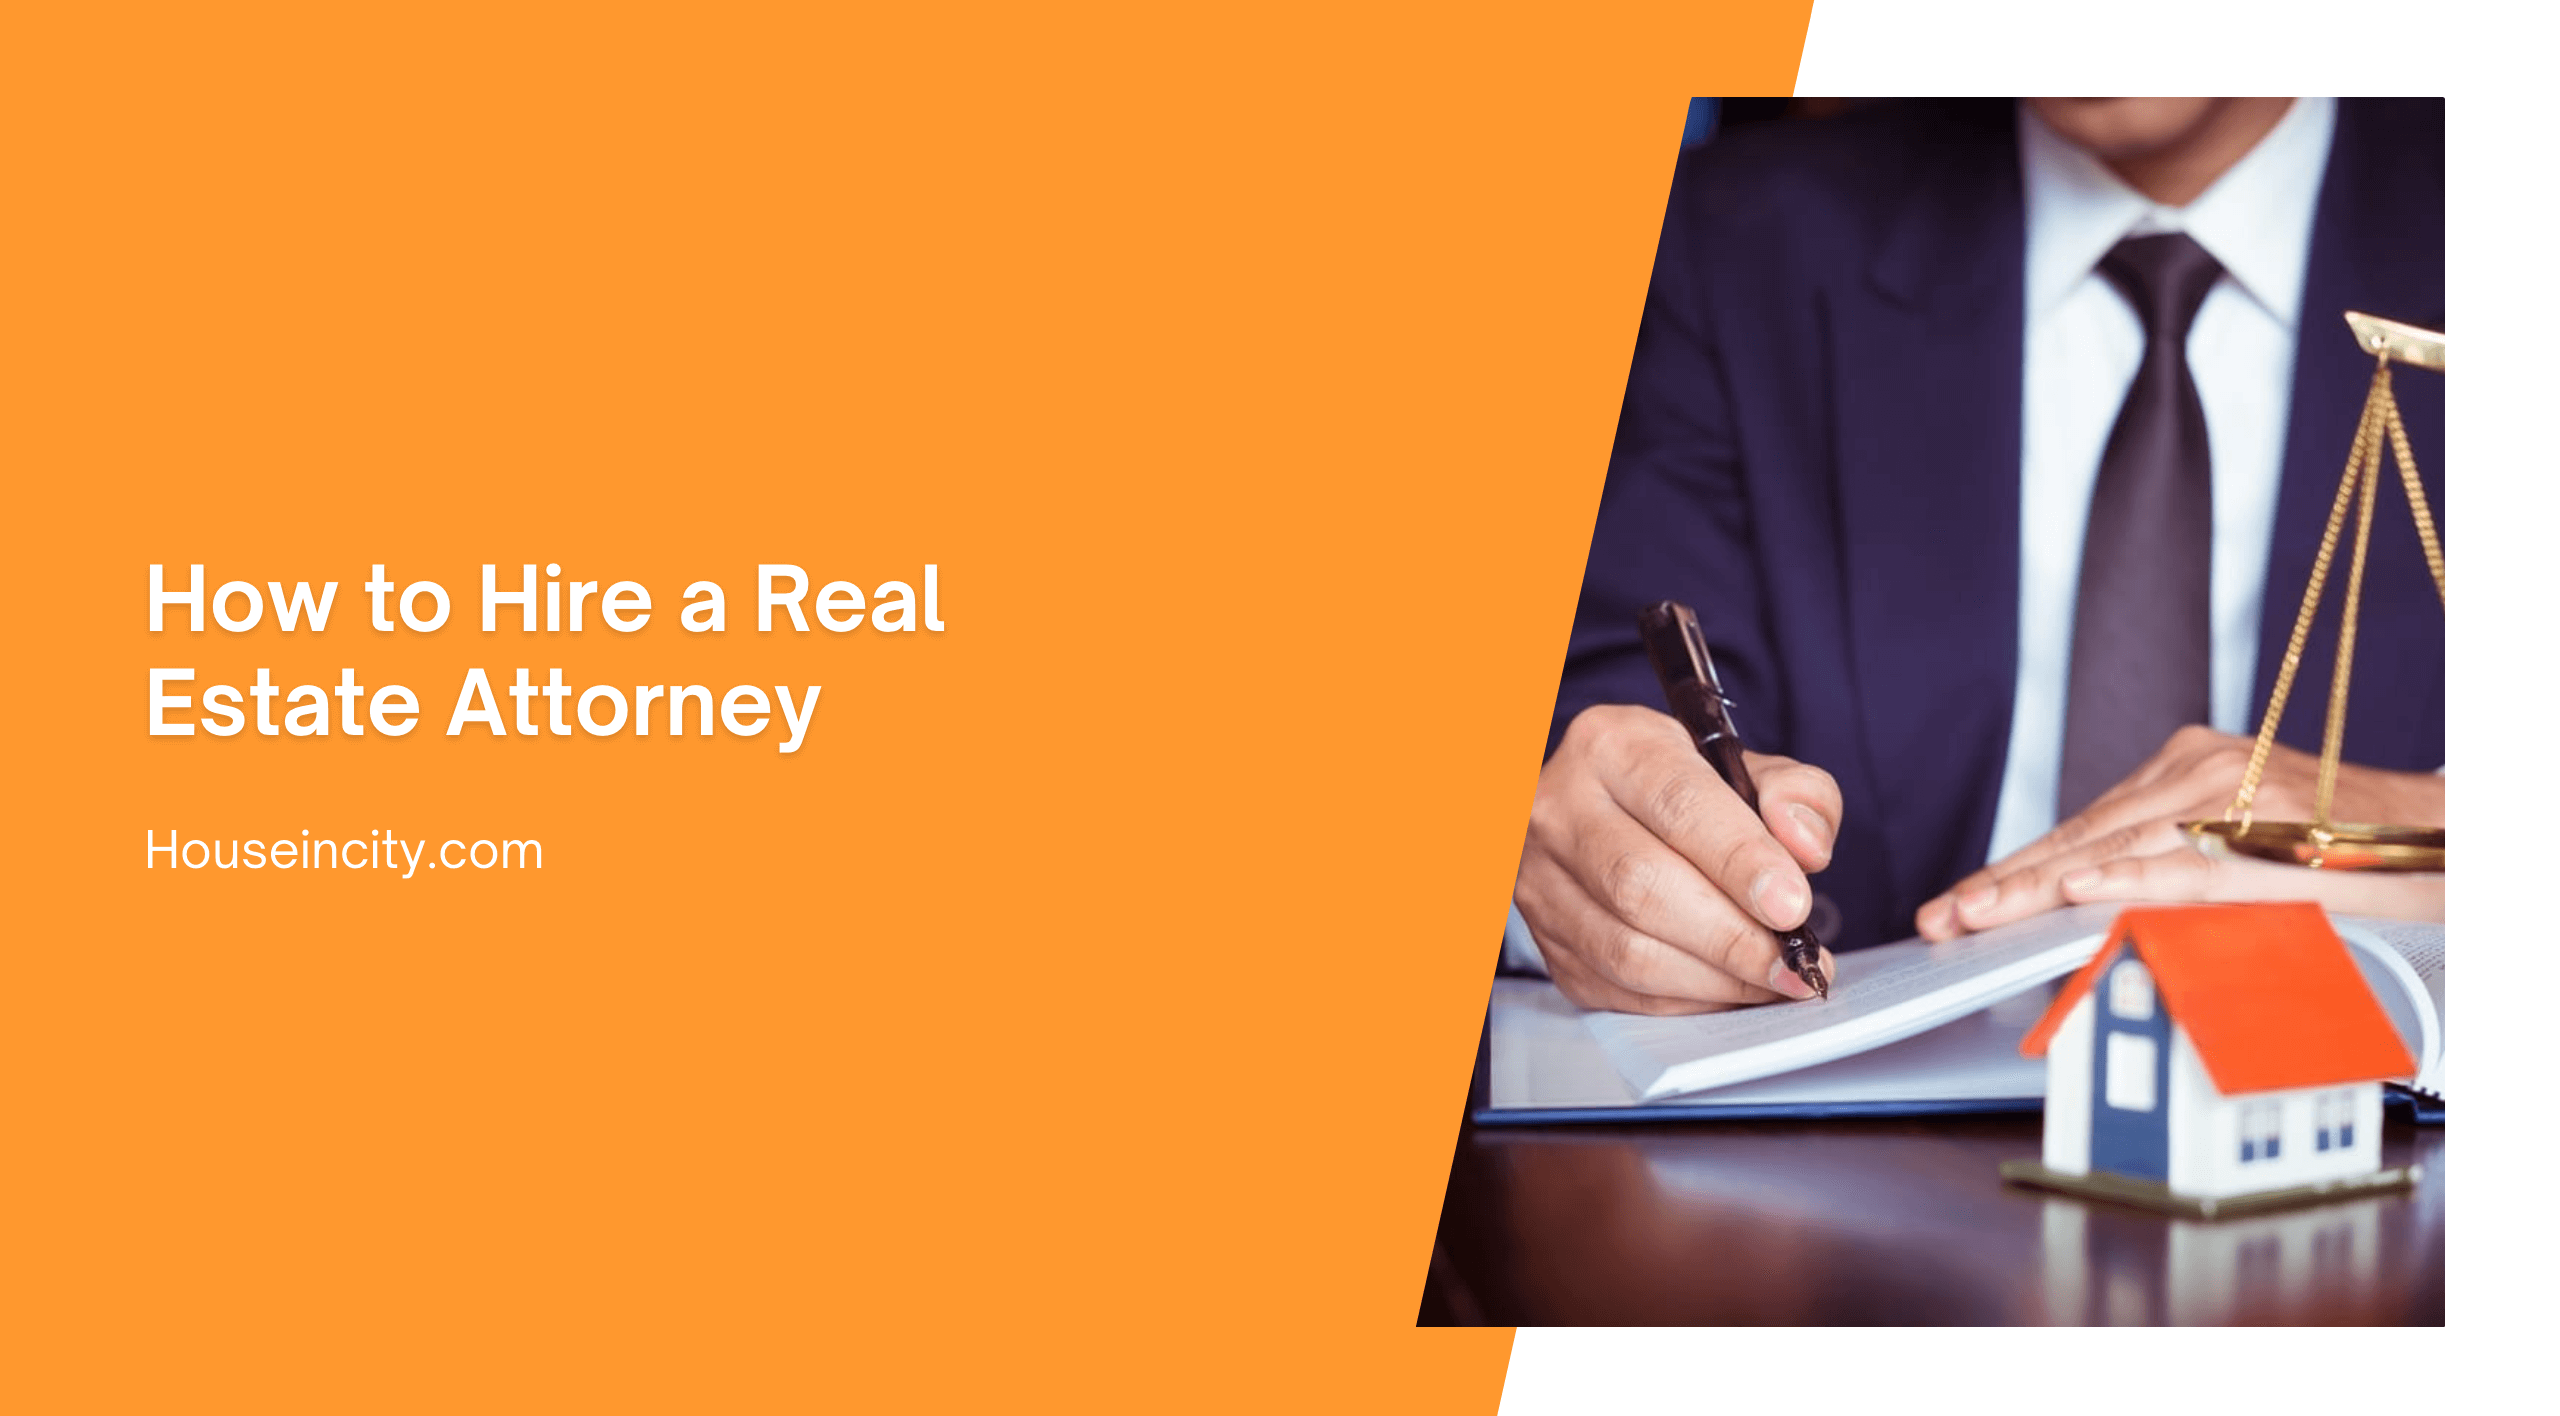 How to Hire a Real Estate Attorney